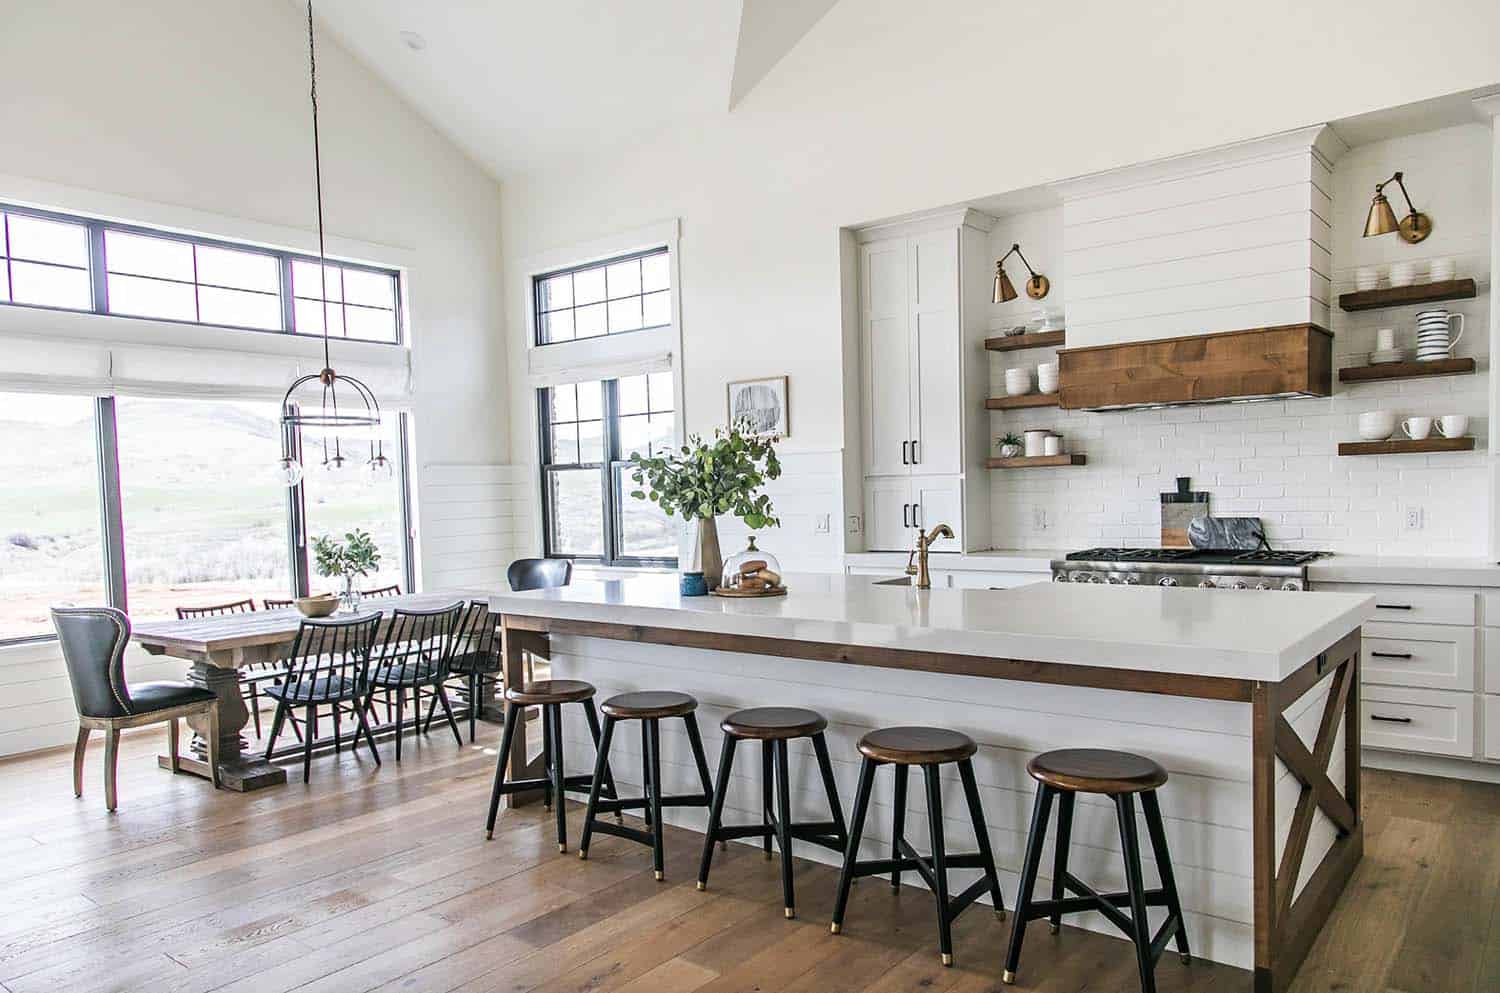 Modern farmhouse style in Utah features stylish living spaces